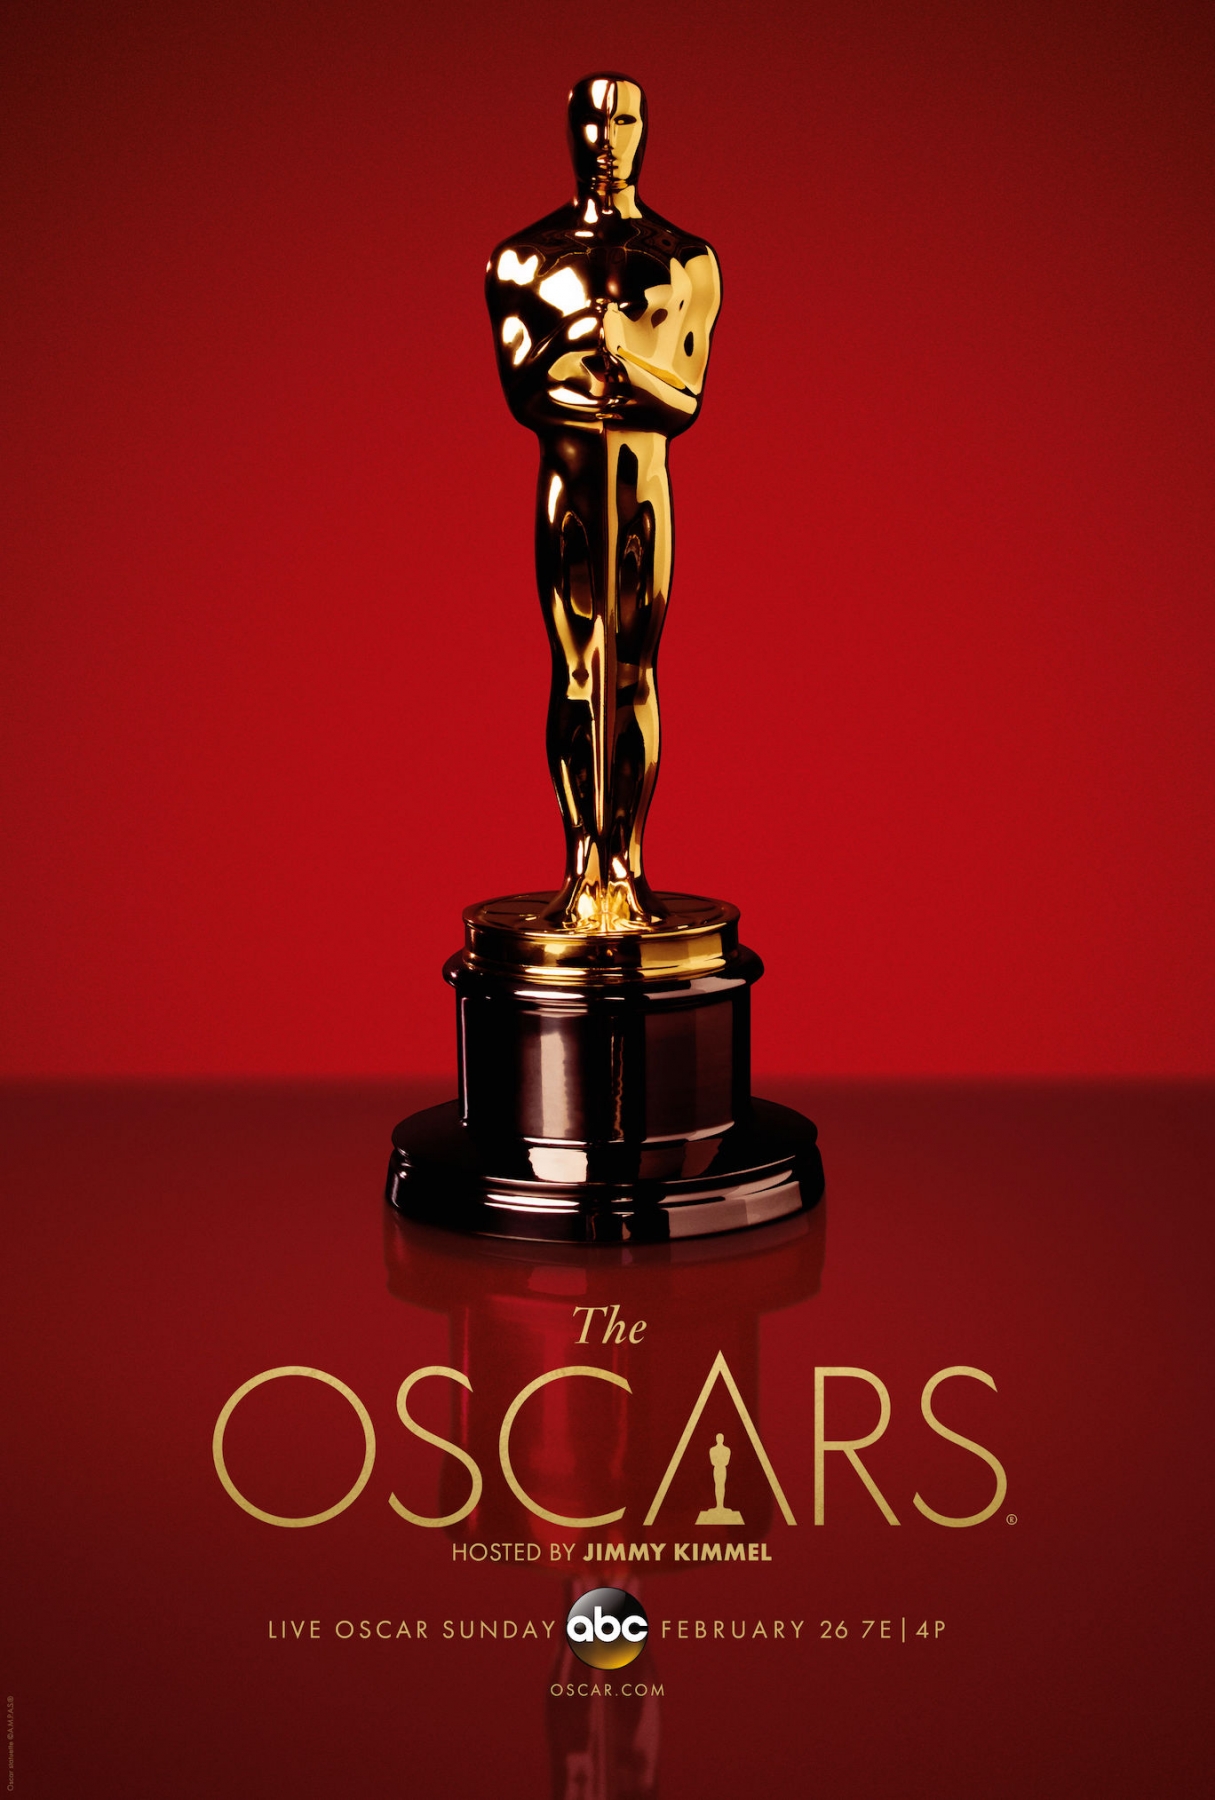 89th Oscars nominations announced1215 x 1800